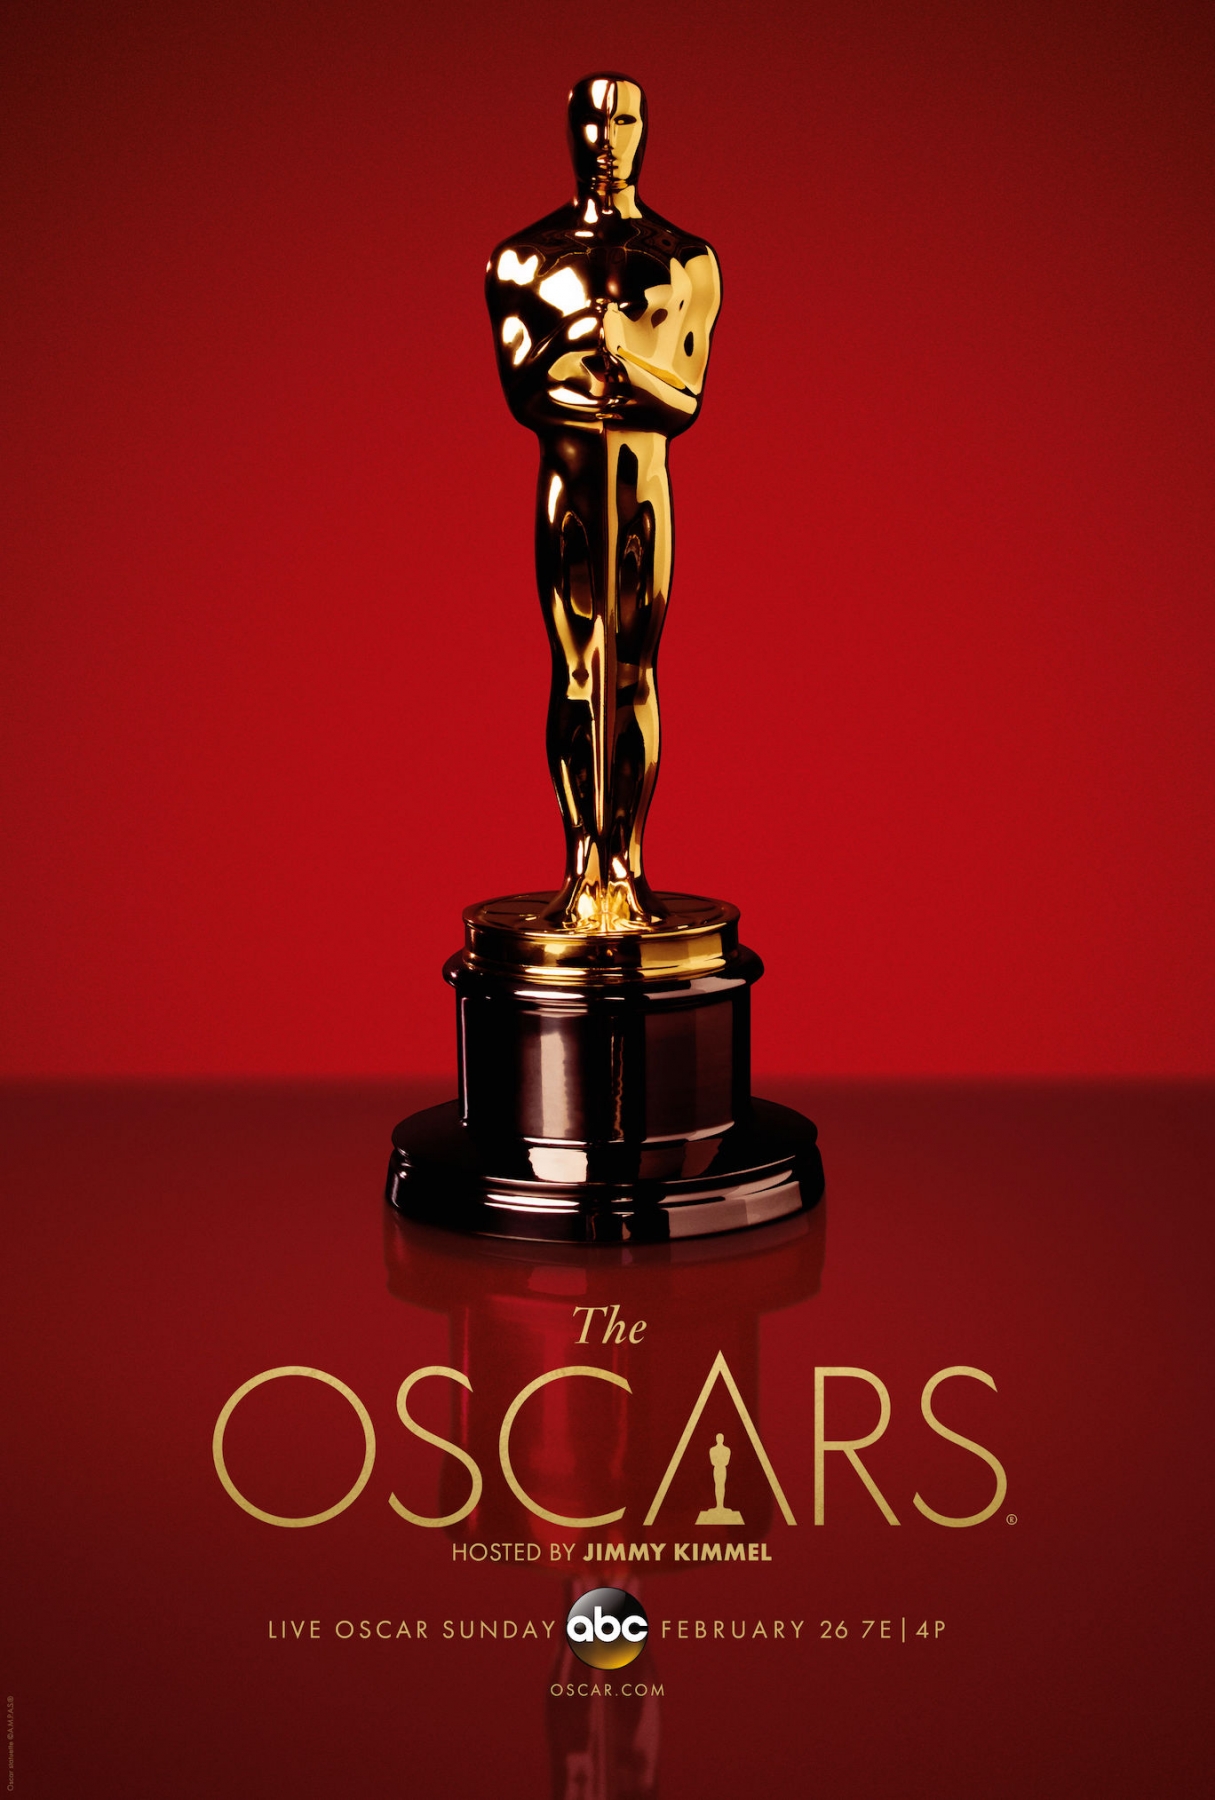 89th Oscars nominations announced1215 x 1800